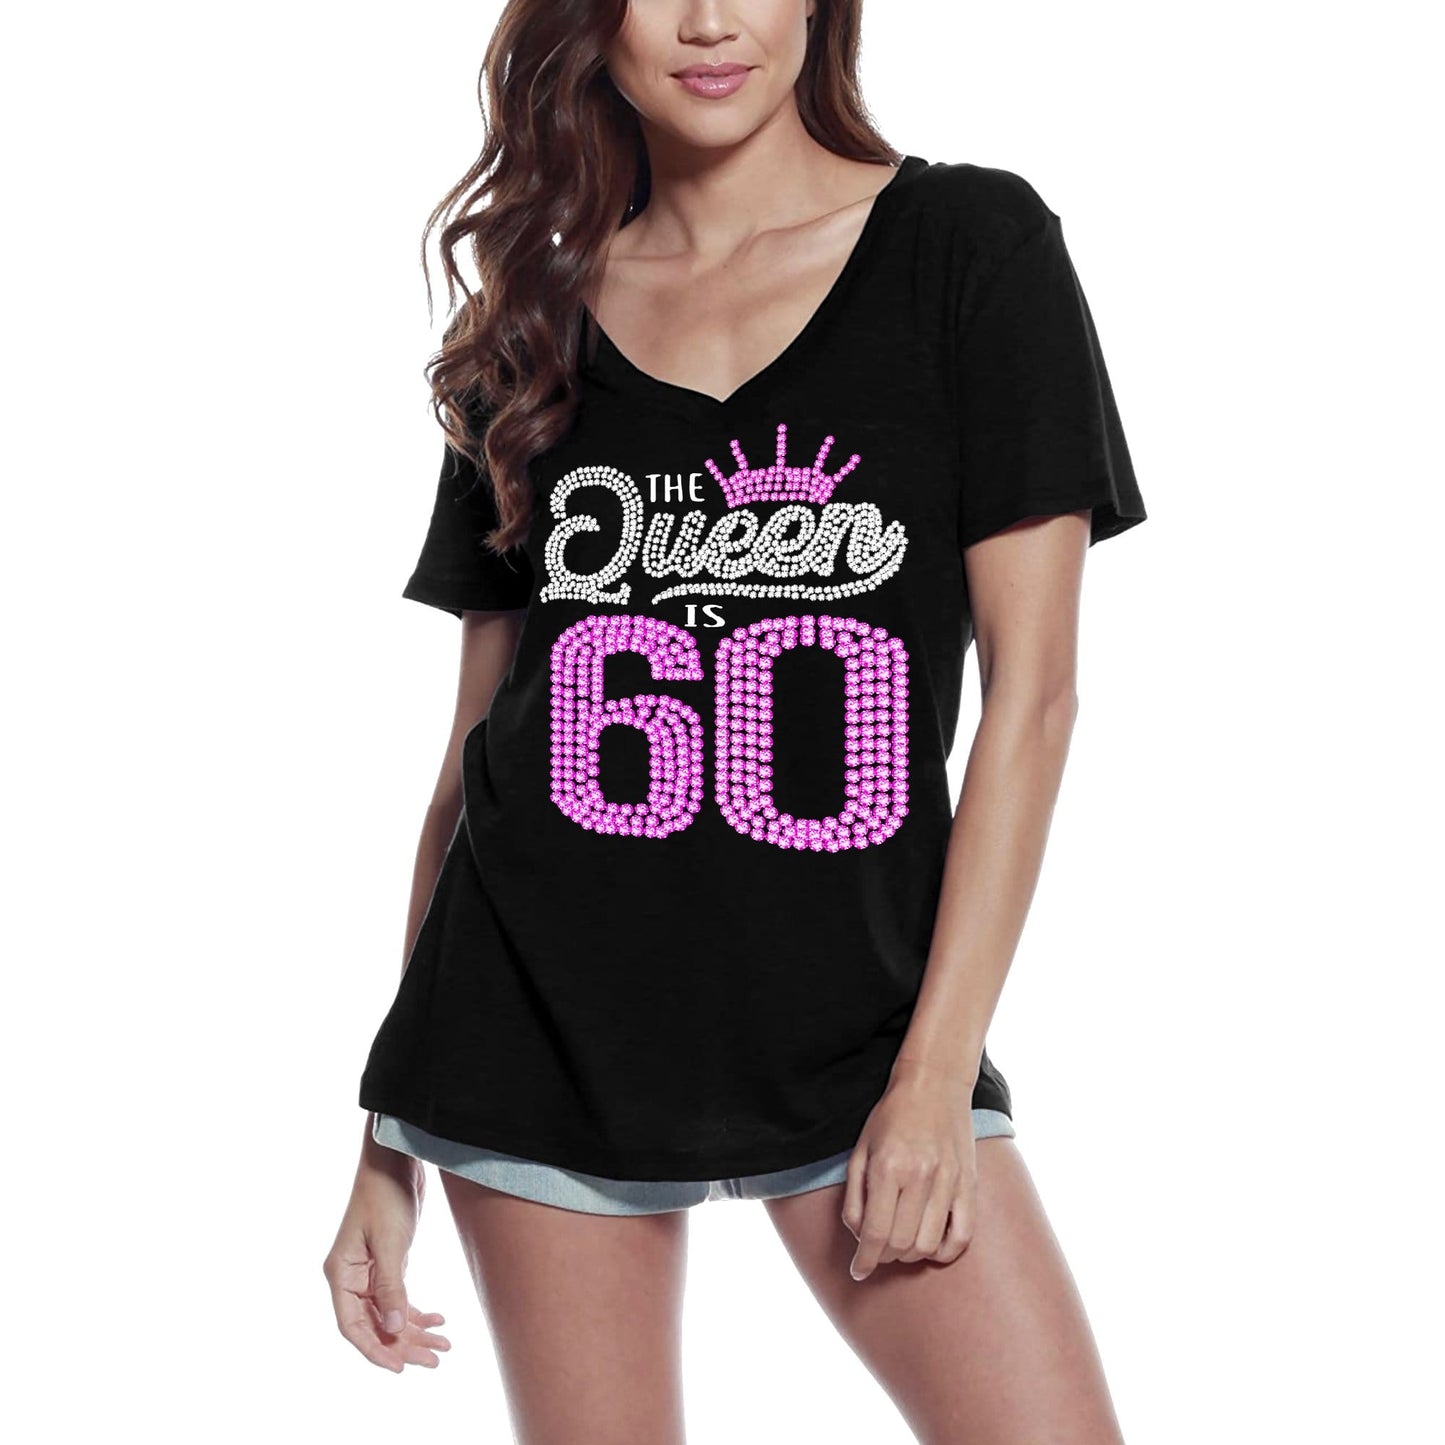 ULTRABASIC Women's T-Shirt The Queen is 60 - 60th Birthday Shirt Gift for Ladies